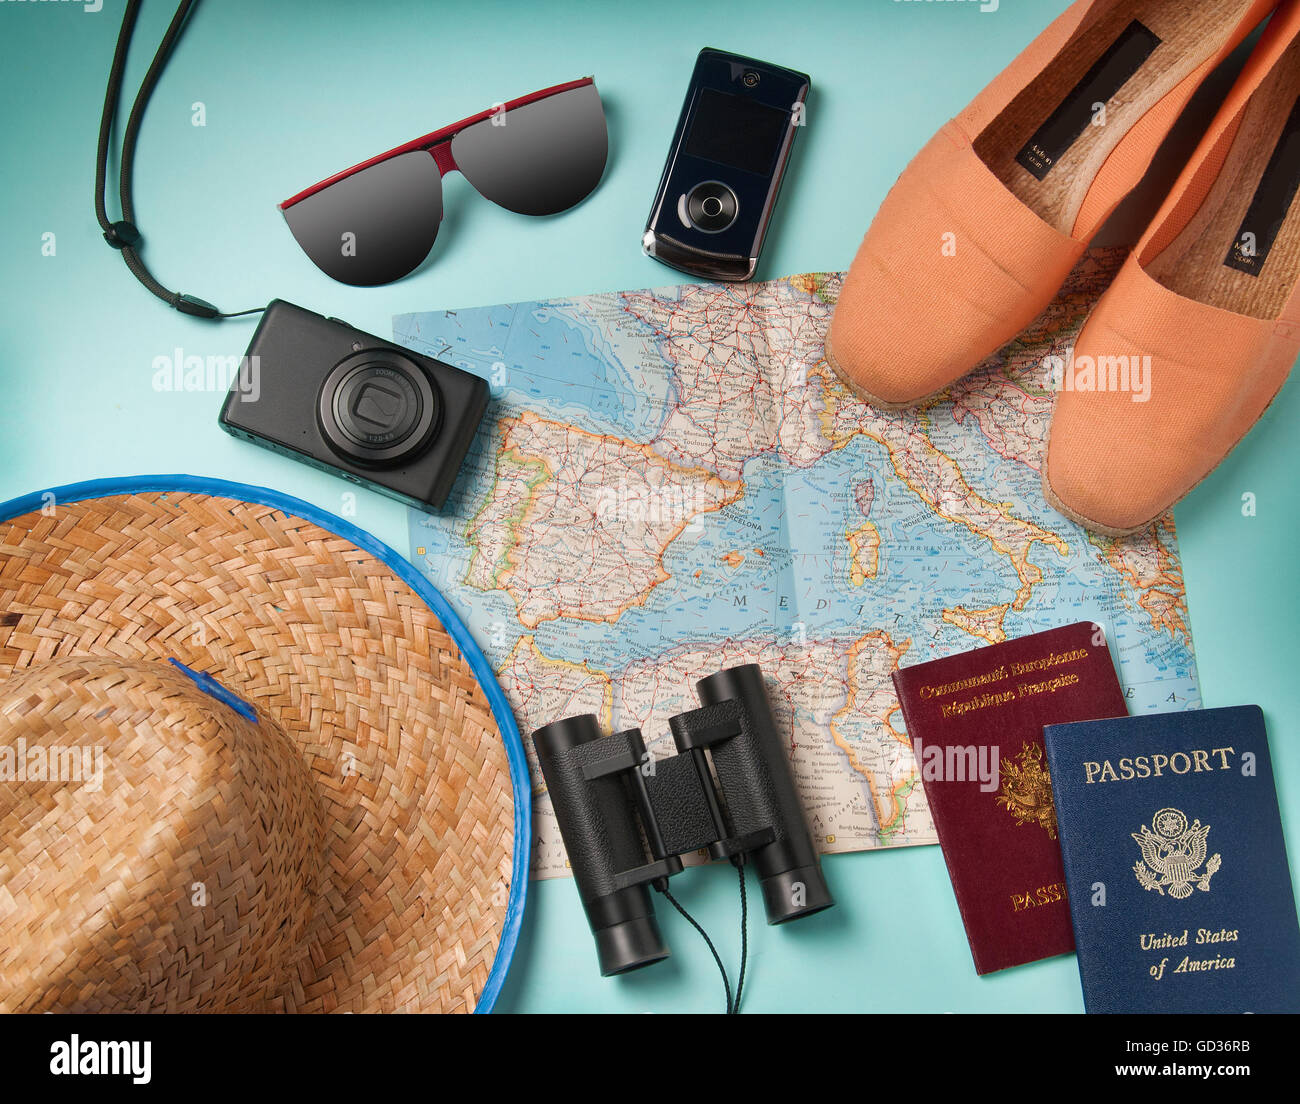 summer vacation, tourism and objects concept - close up of clothes, camera, binoculars, passports and travel map Stock Photo